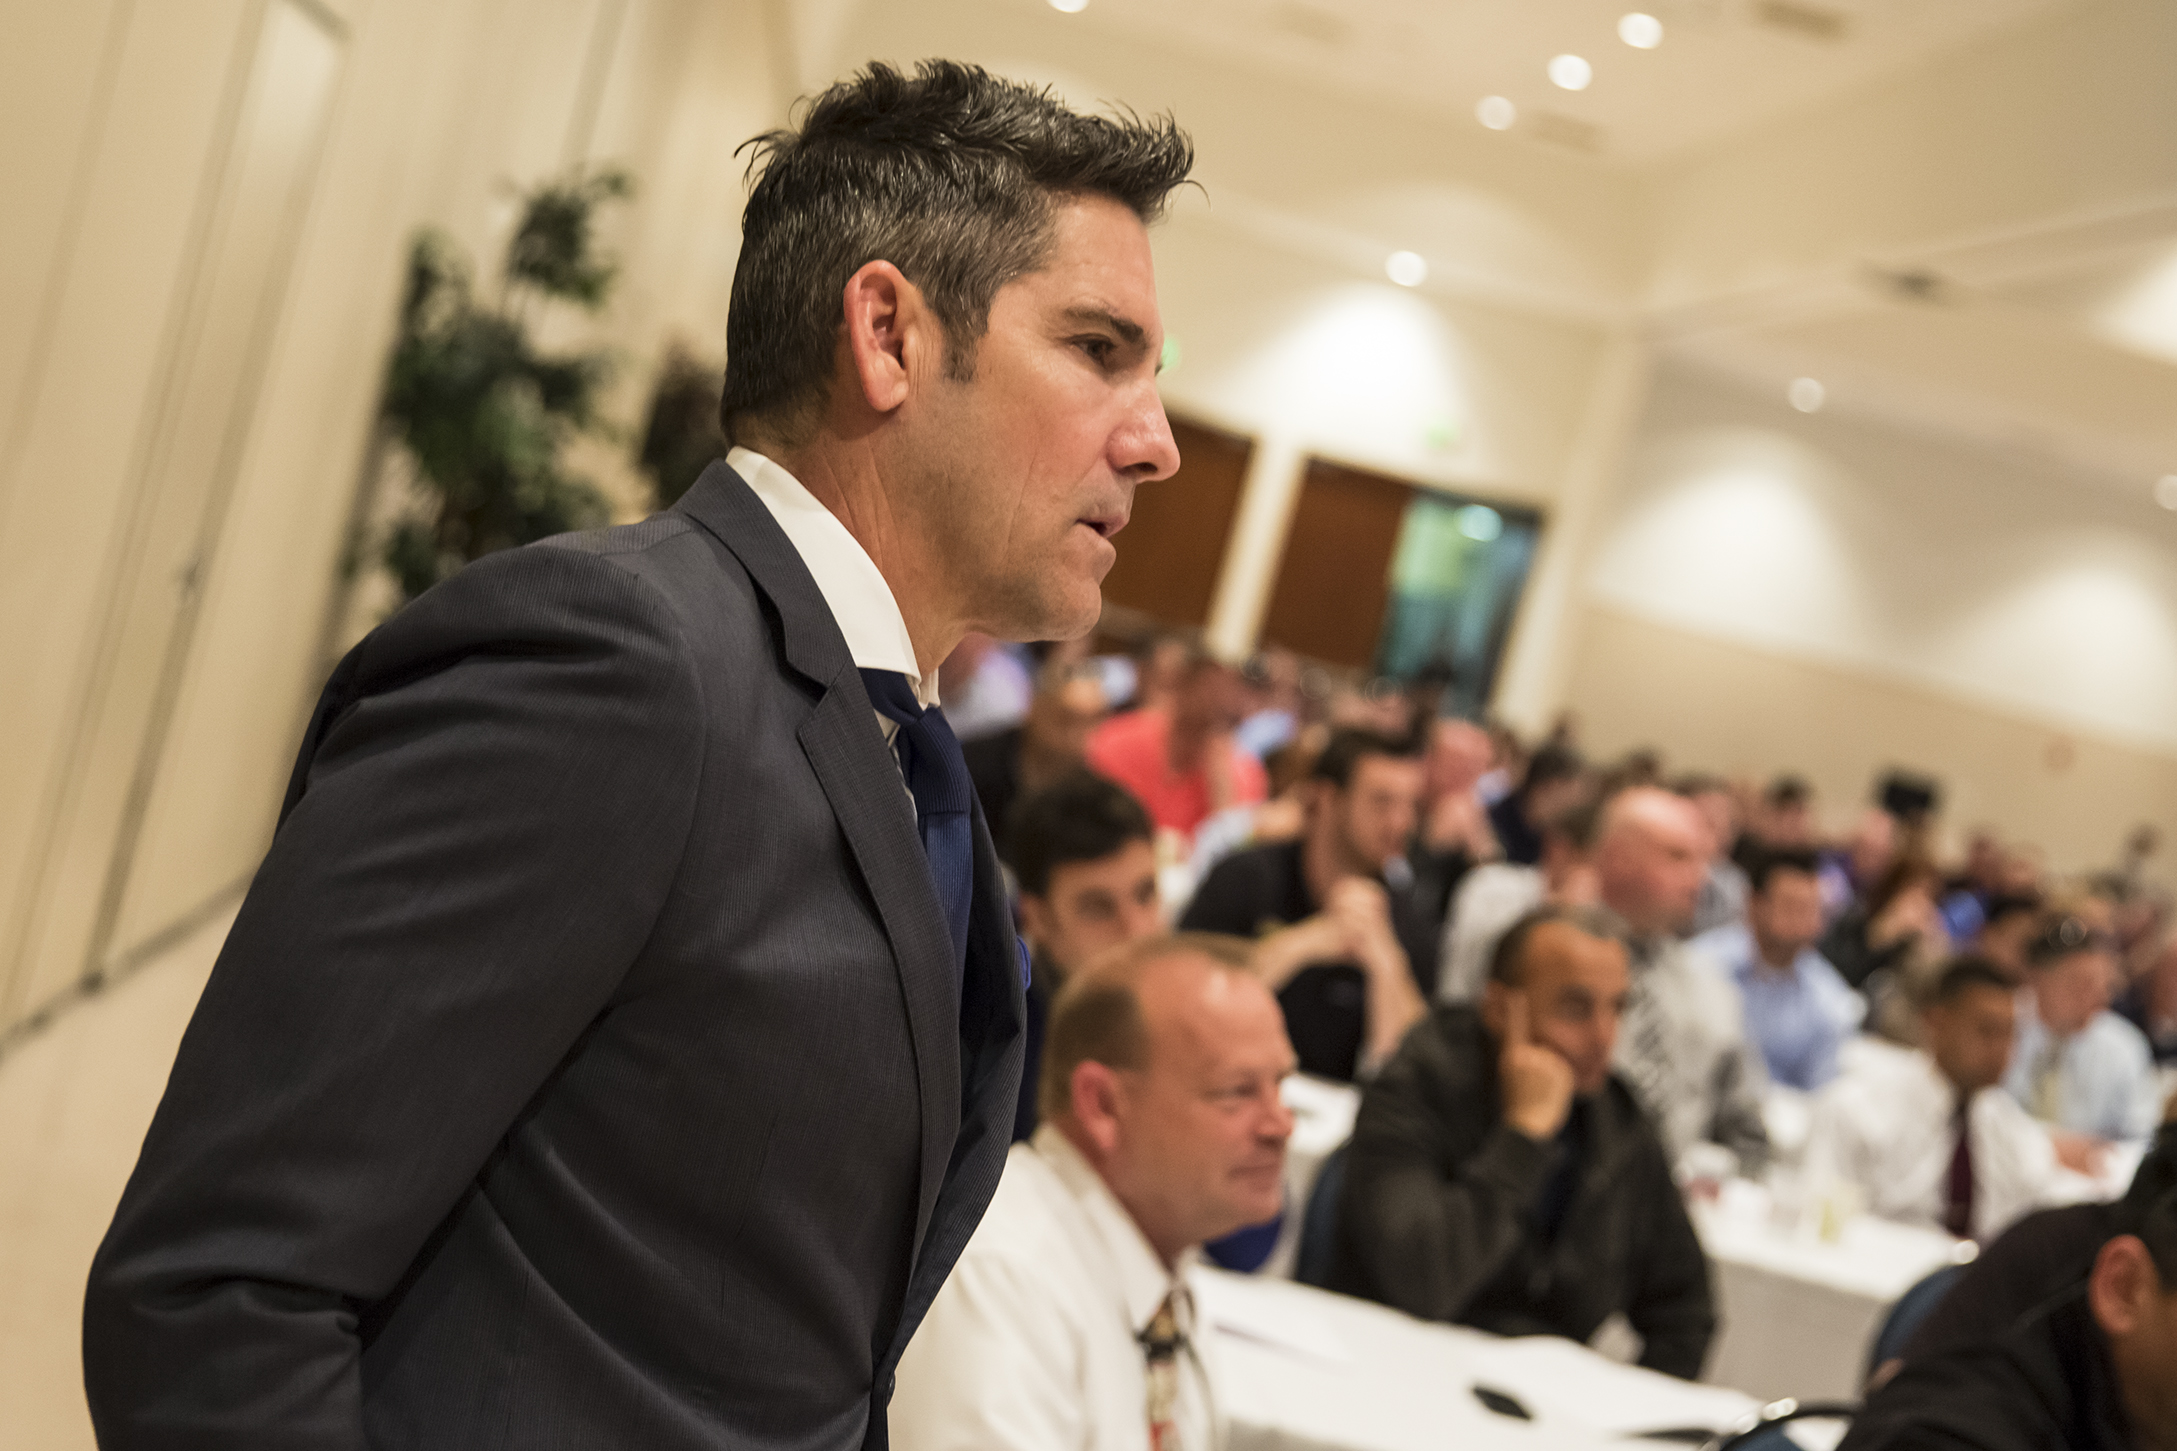 Grant Cardone’s Sales Bootcamp Will Usher in Unprecedented Levels of Business for Entrepreneurs ...